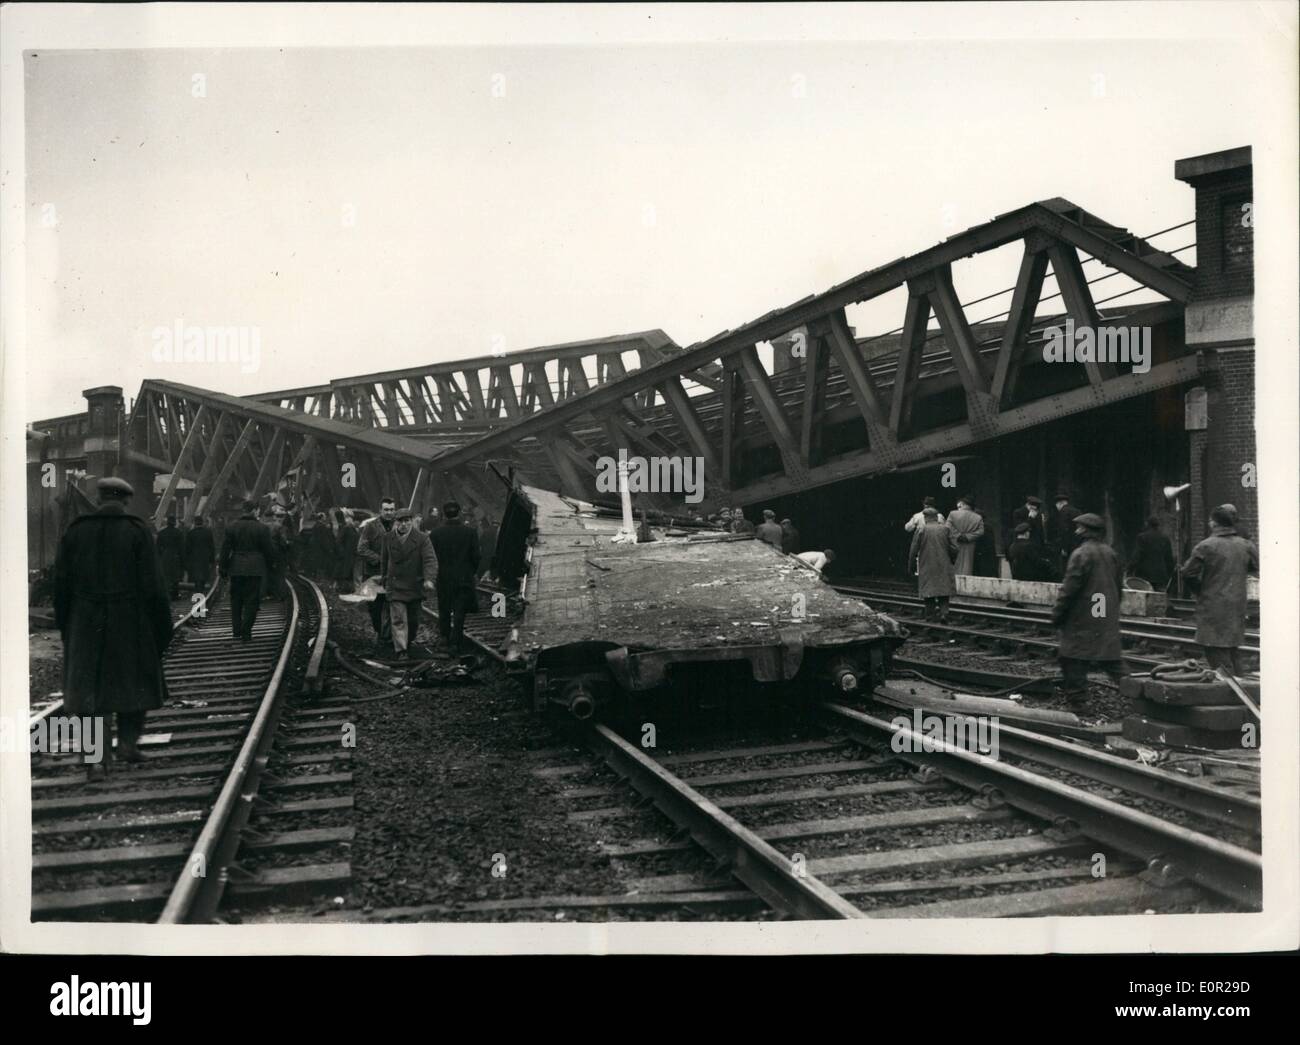 Dec. 12, 1957 - Rescue work goes o  the Lewisham rail crash engineers try to raise the fly-over bridge: The death roll has now reached 92 in Wednesday night's Lewisham rail crash. Rescuers have toiled all night under  are lights and early this morning engineers were trying to raise the wrecked bridge to clear the coach on which the full weight of the fly-over bridge fall. Photo shows the first clear picture of the disaster taken after the fog had lifted today showing the fly-over bridge which collapsed on one of the trains after the crash Stock Photo